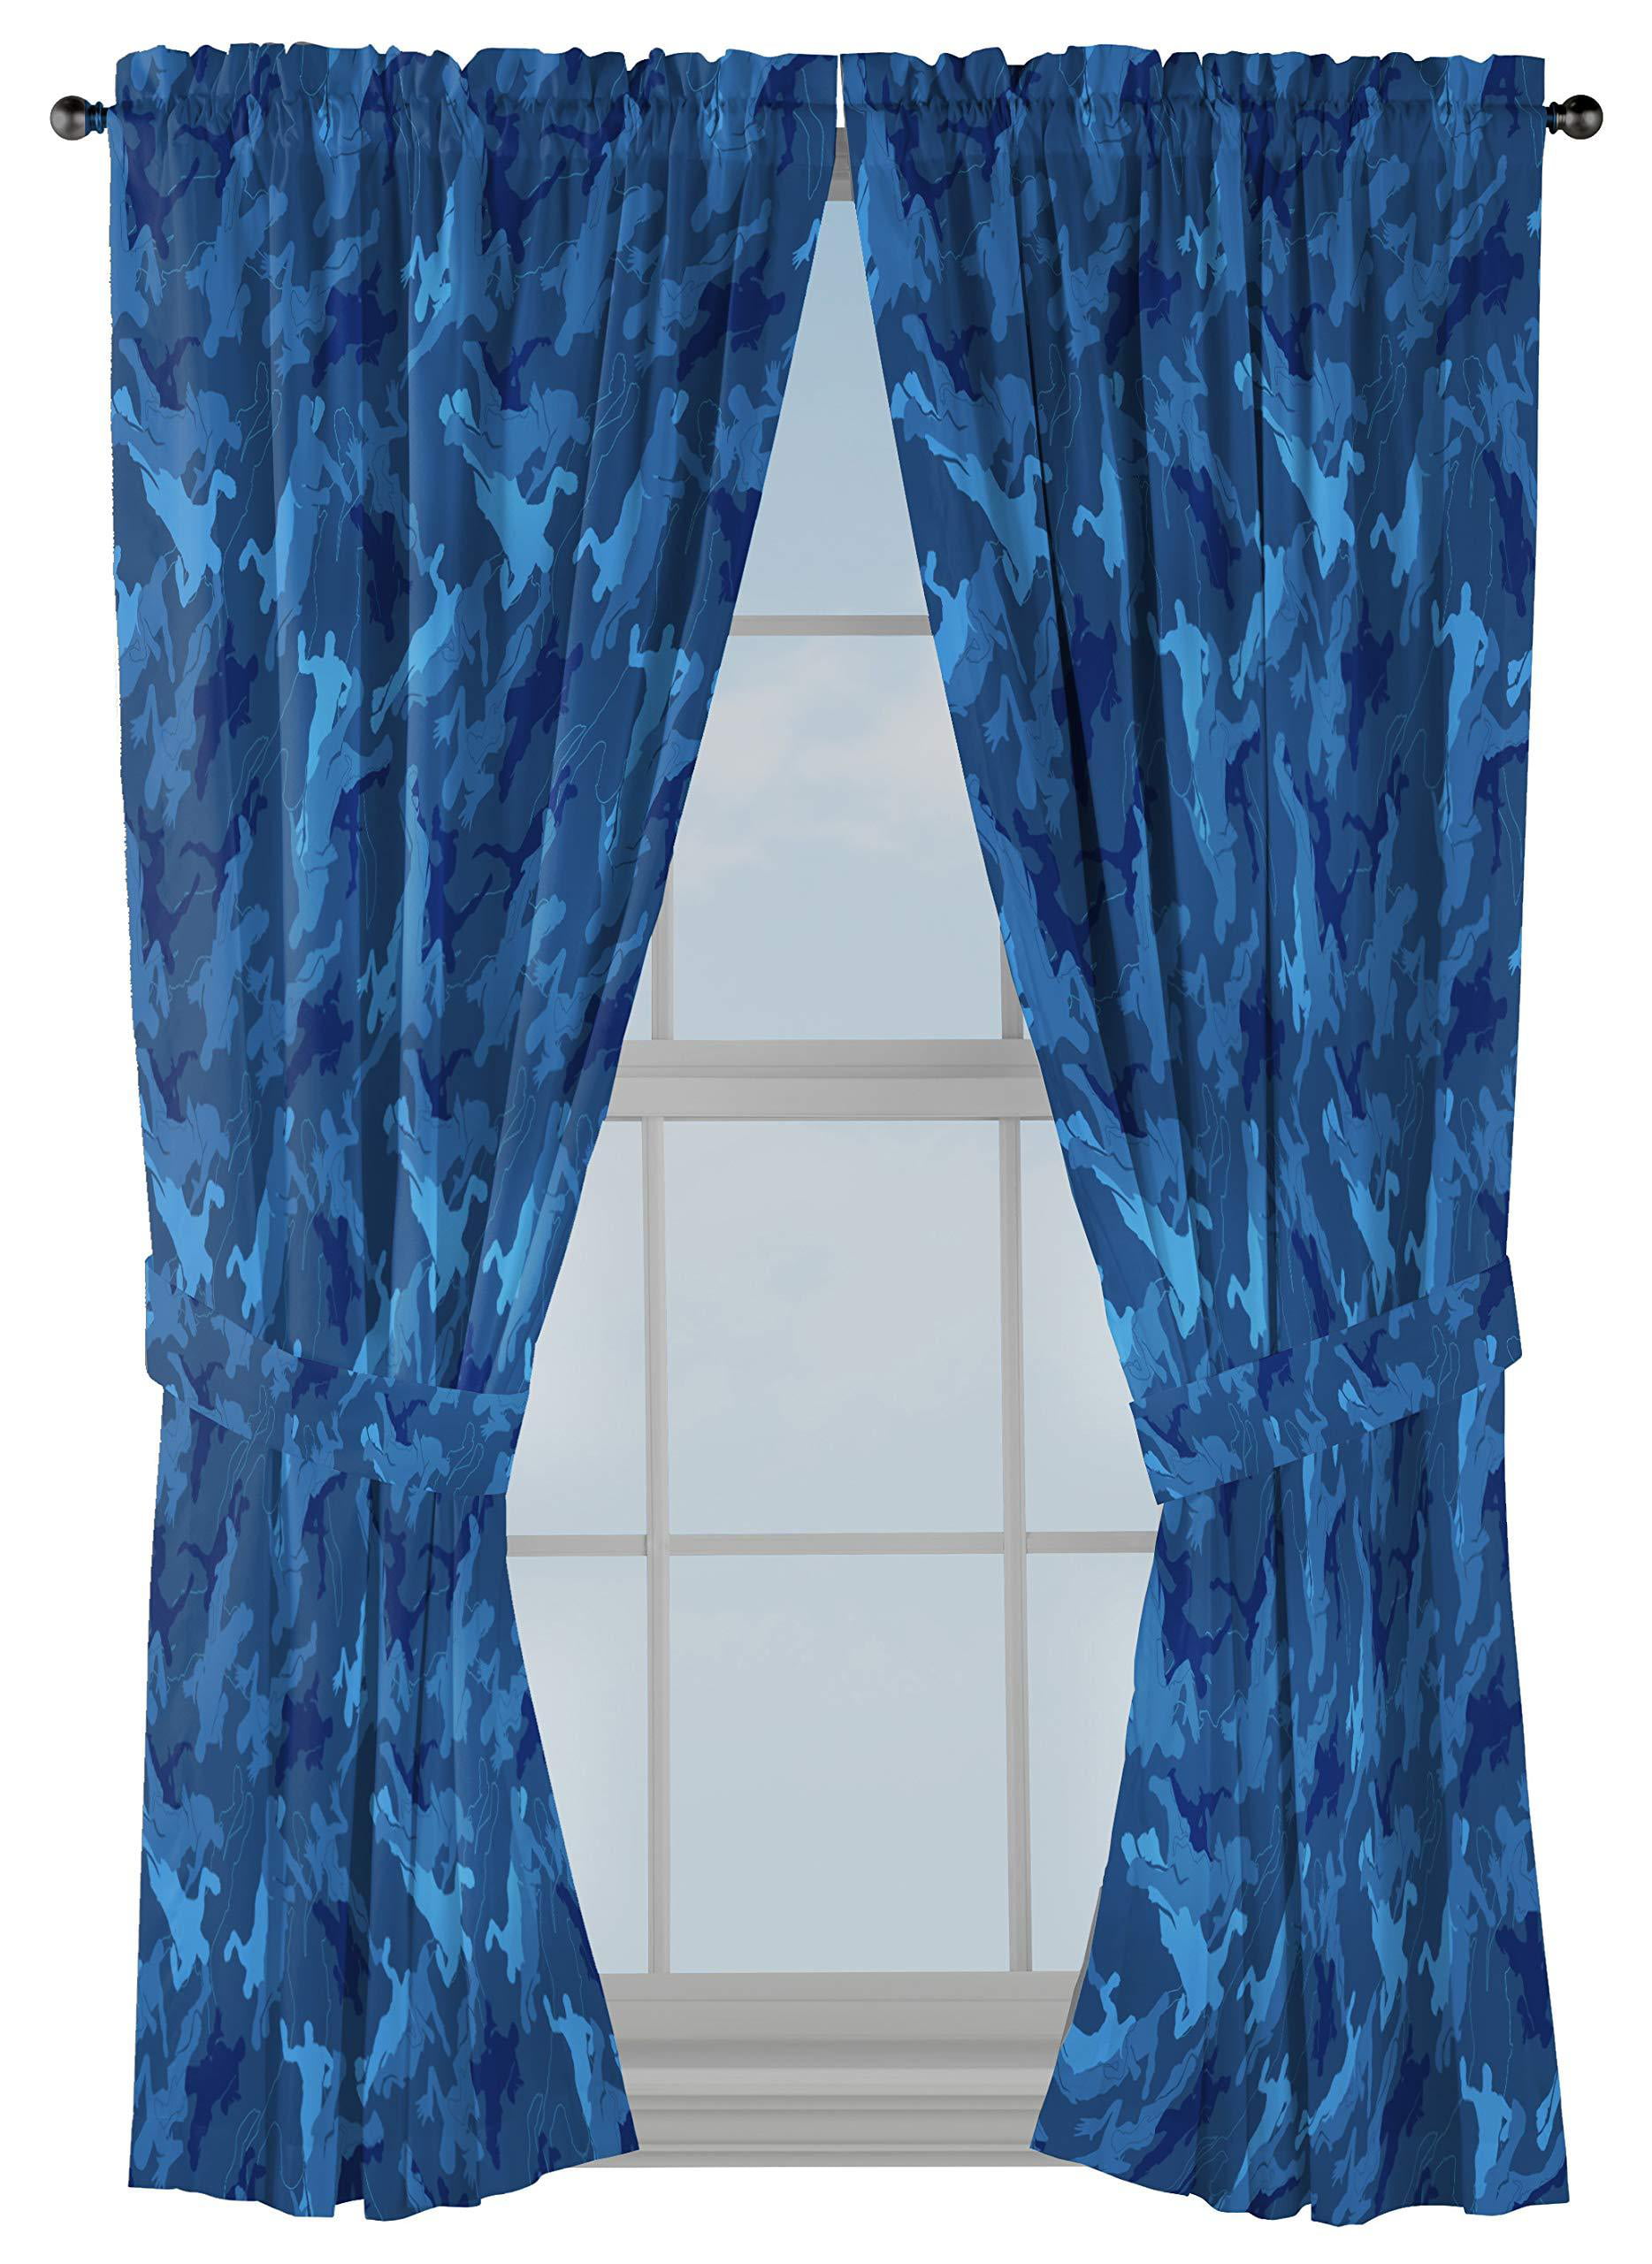 Kids Collection Bedding 4 Piece Blue Curtain Set with Panel tiebacks FOOTBALL 